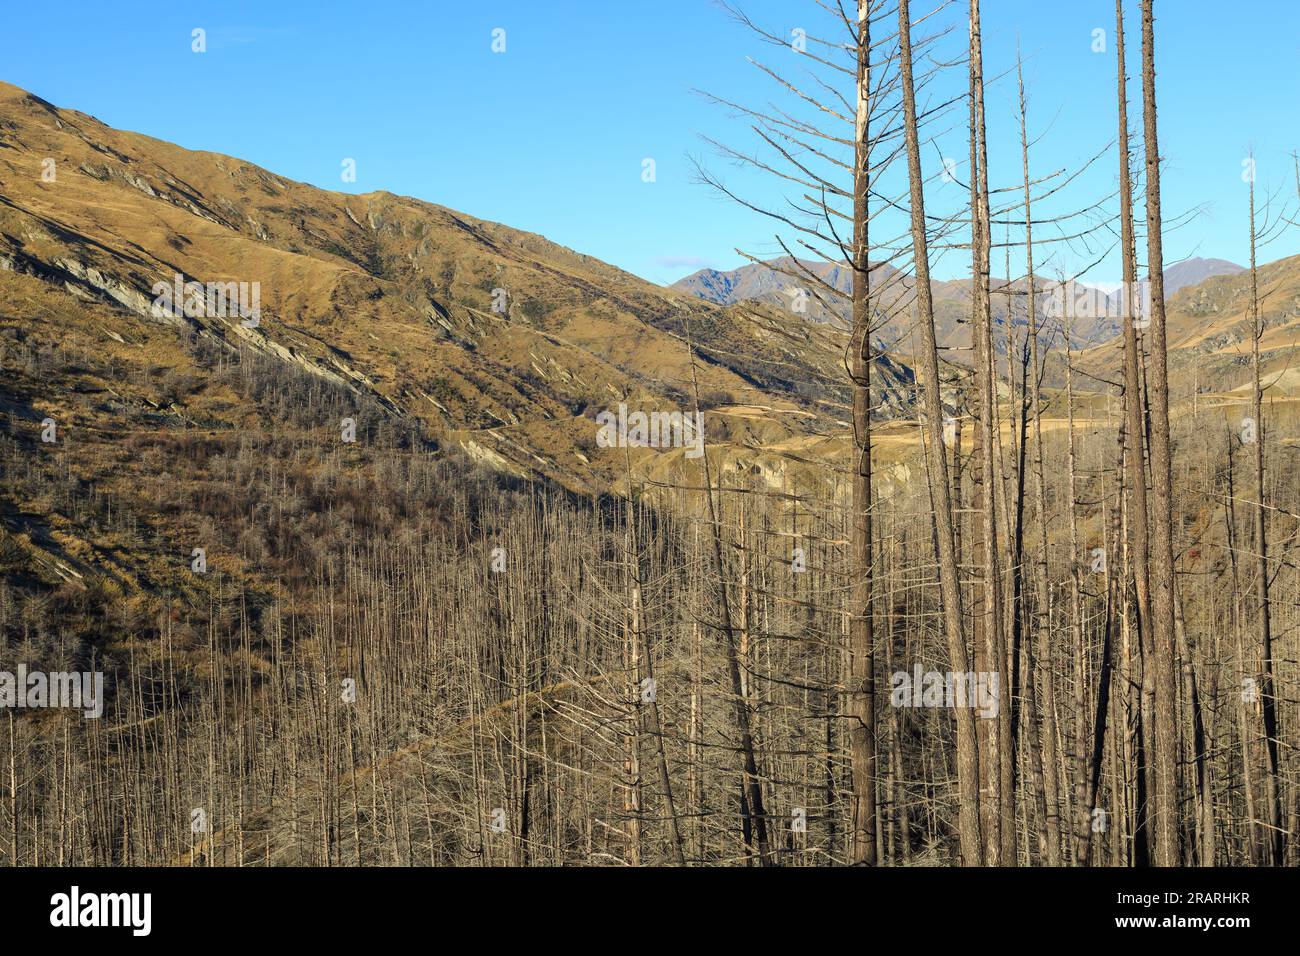 Skippers Canyon, Central Otago, New Zealand. A dead forest of invasive 'wilding' pines, deliberately killed with herbicide, in the stark landscape Stock Photo